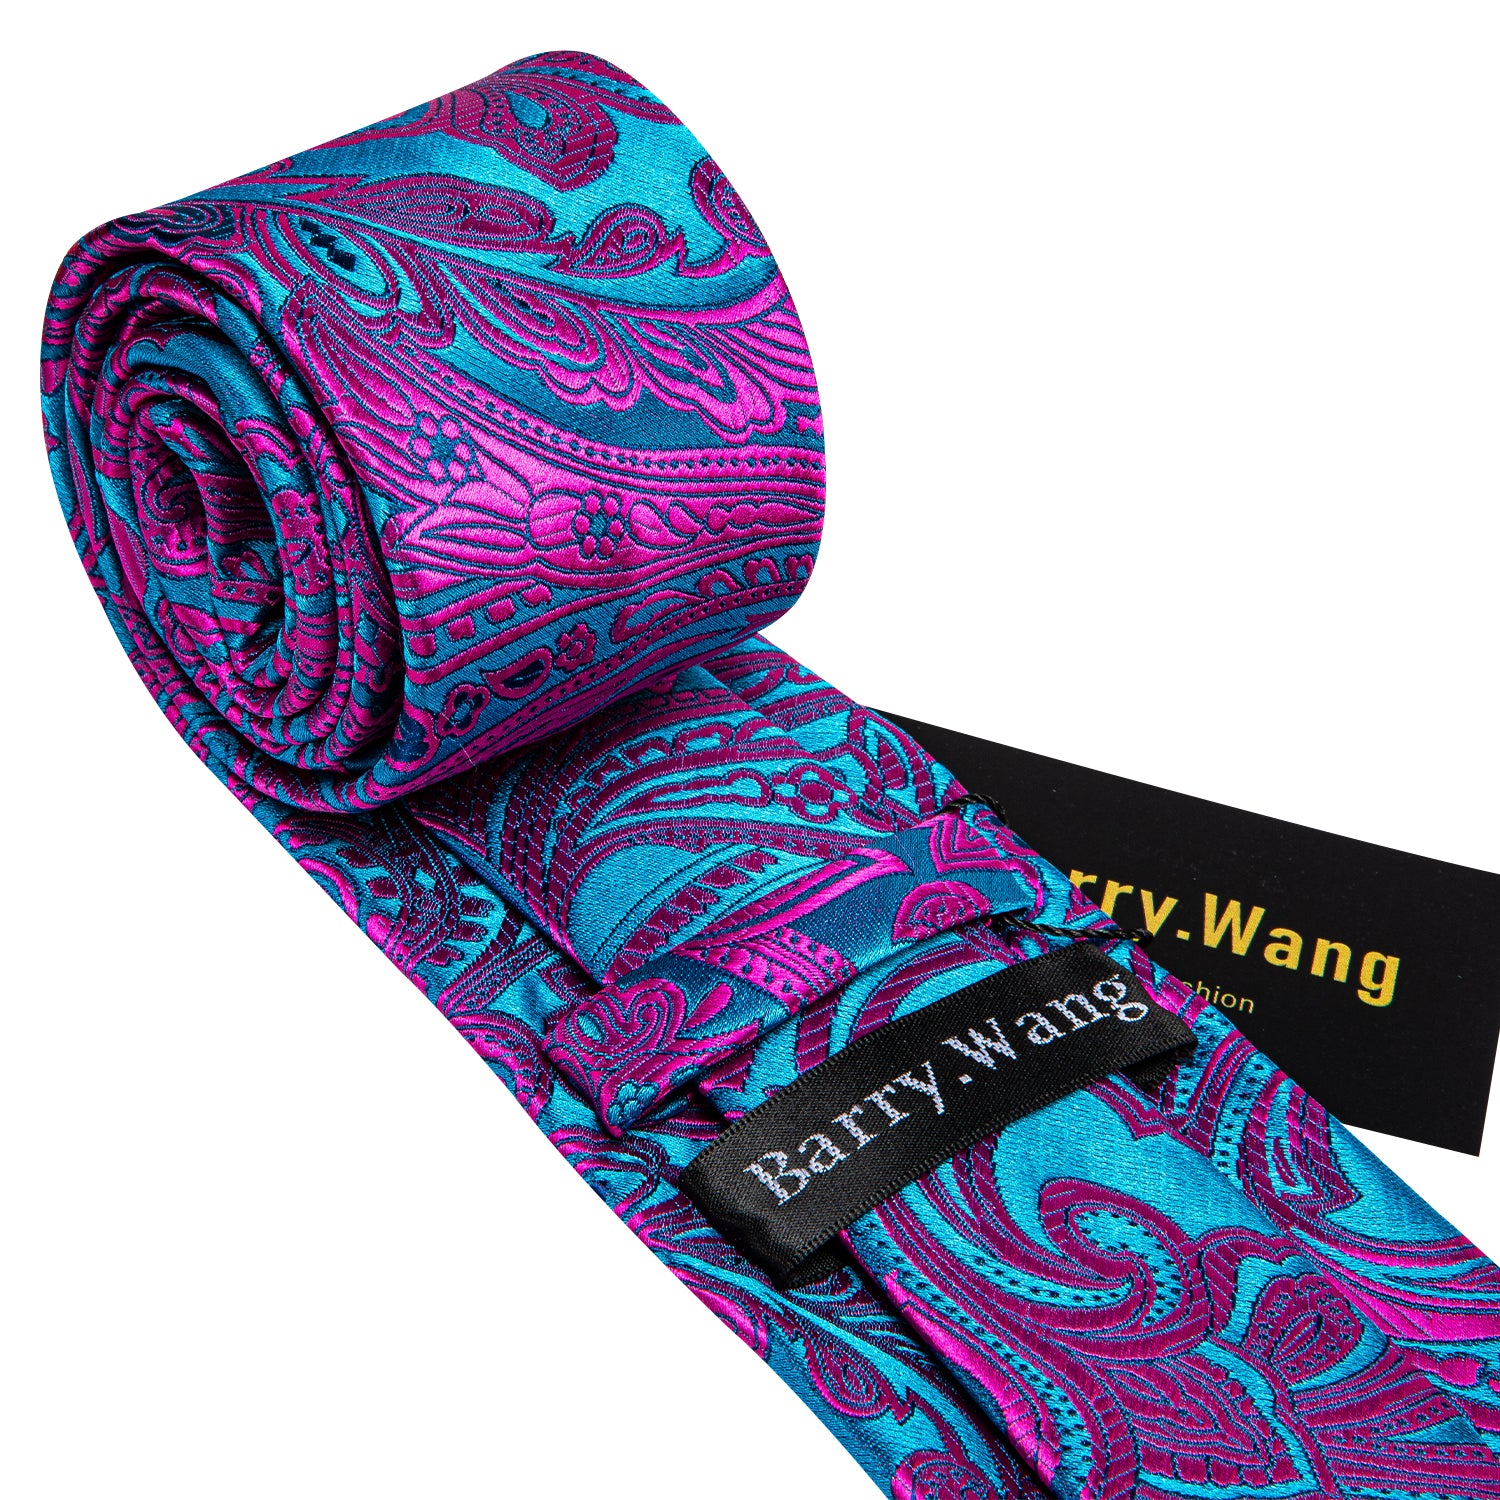 Barry.wang Blue Tie Red Paisley Tie Pocket Square Cufflinks Gift Box Set